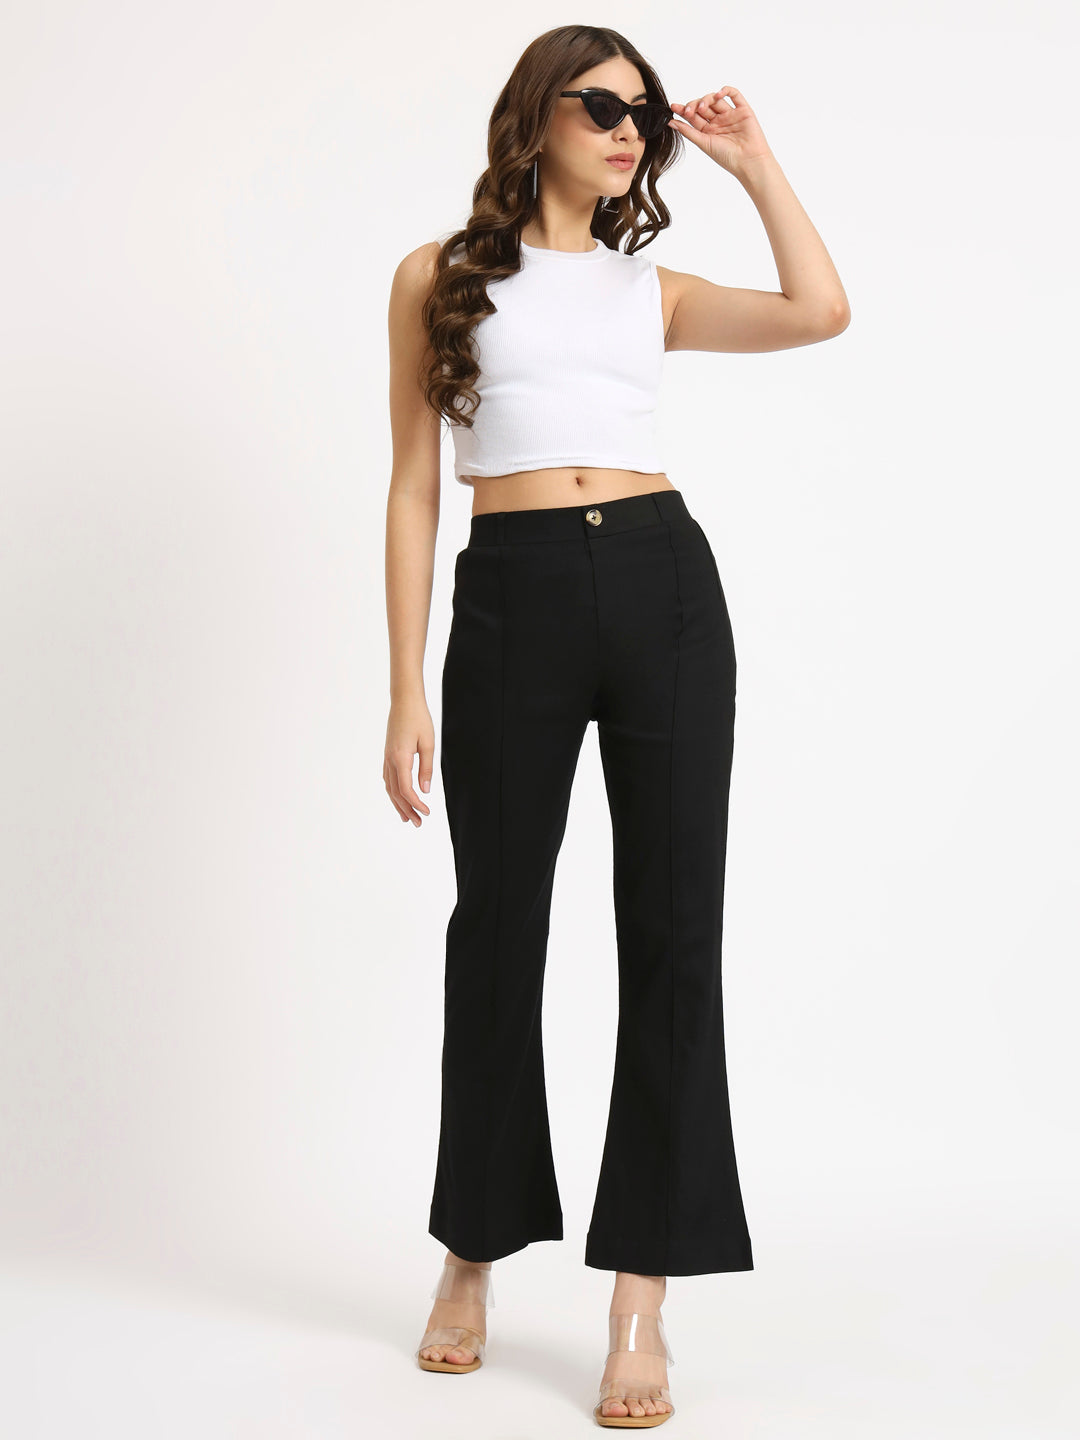 The bell bottoms: from the runway to the high-street